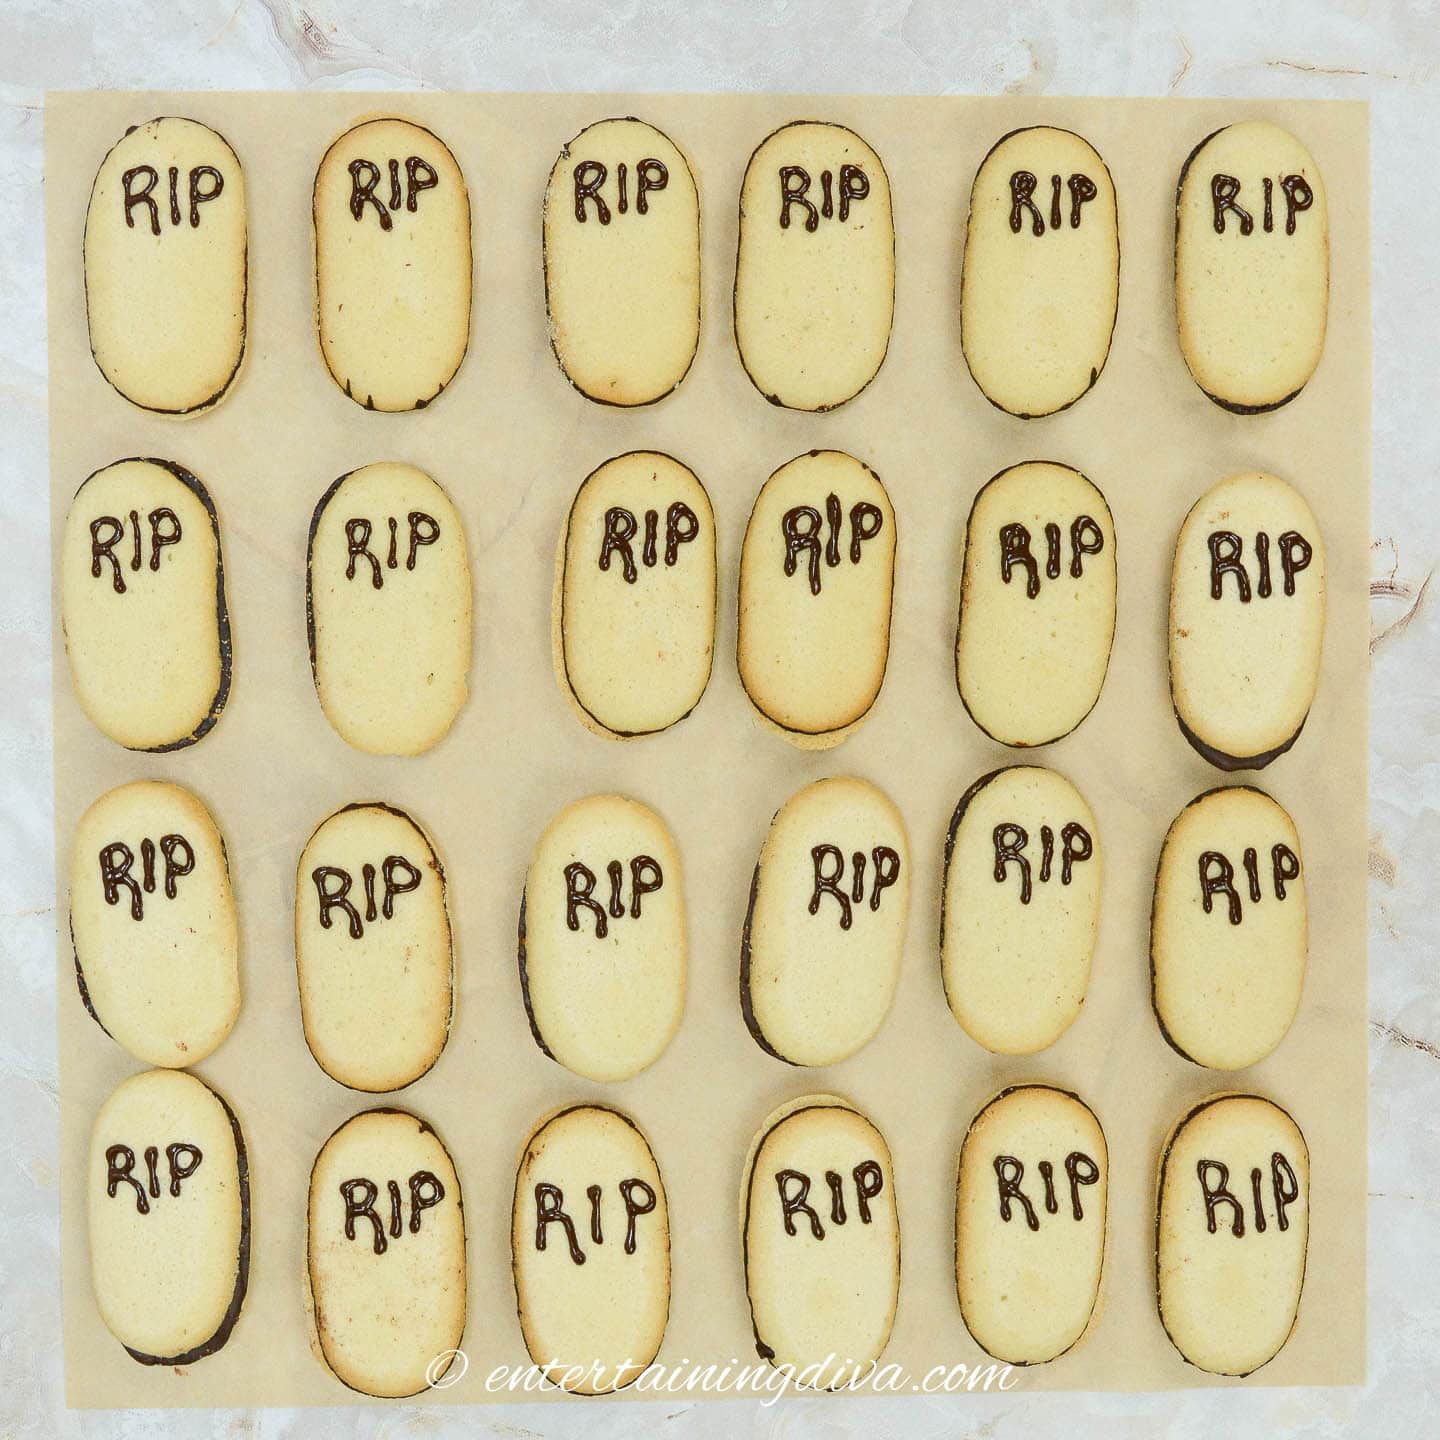 A tray of Halloween tombstone cookies with the word "rip" written on them.